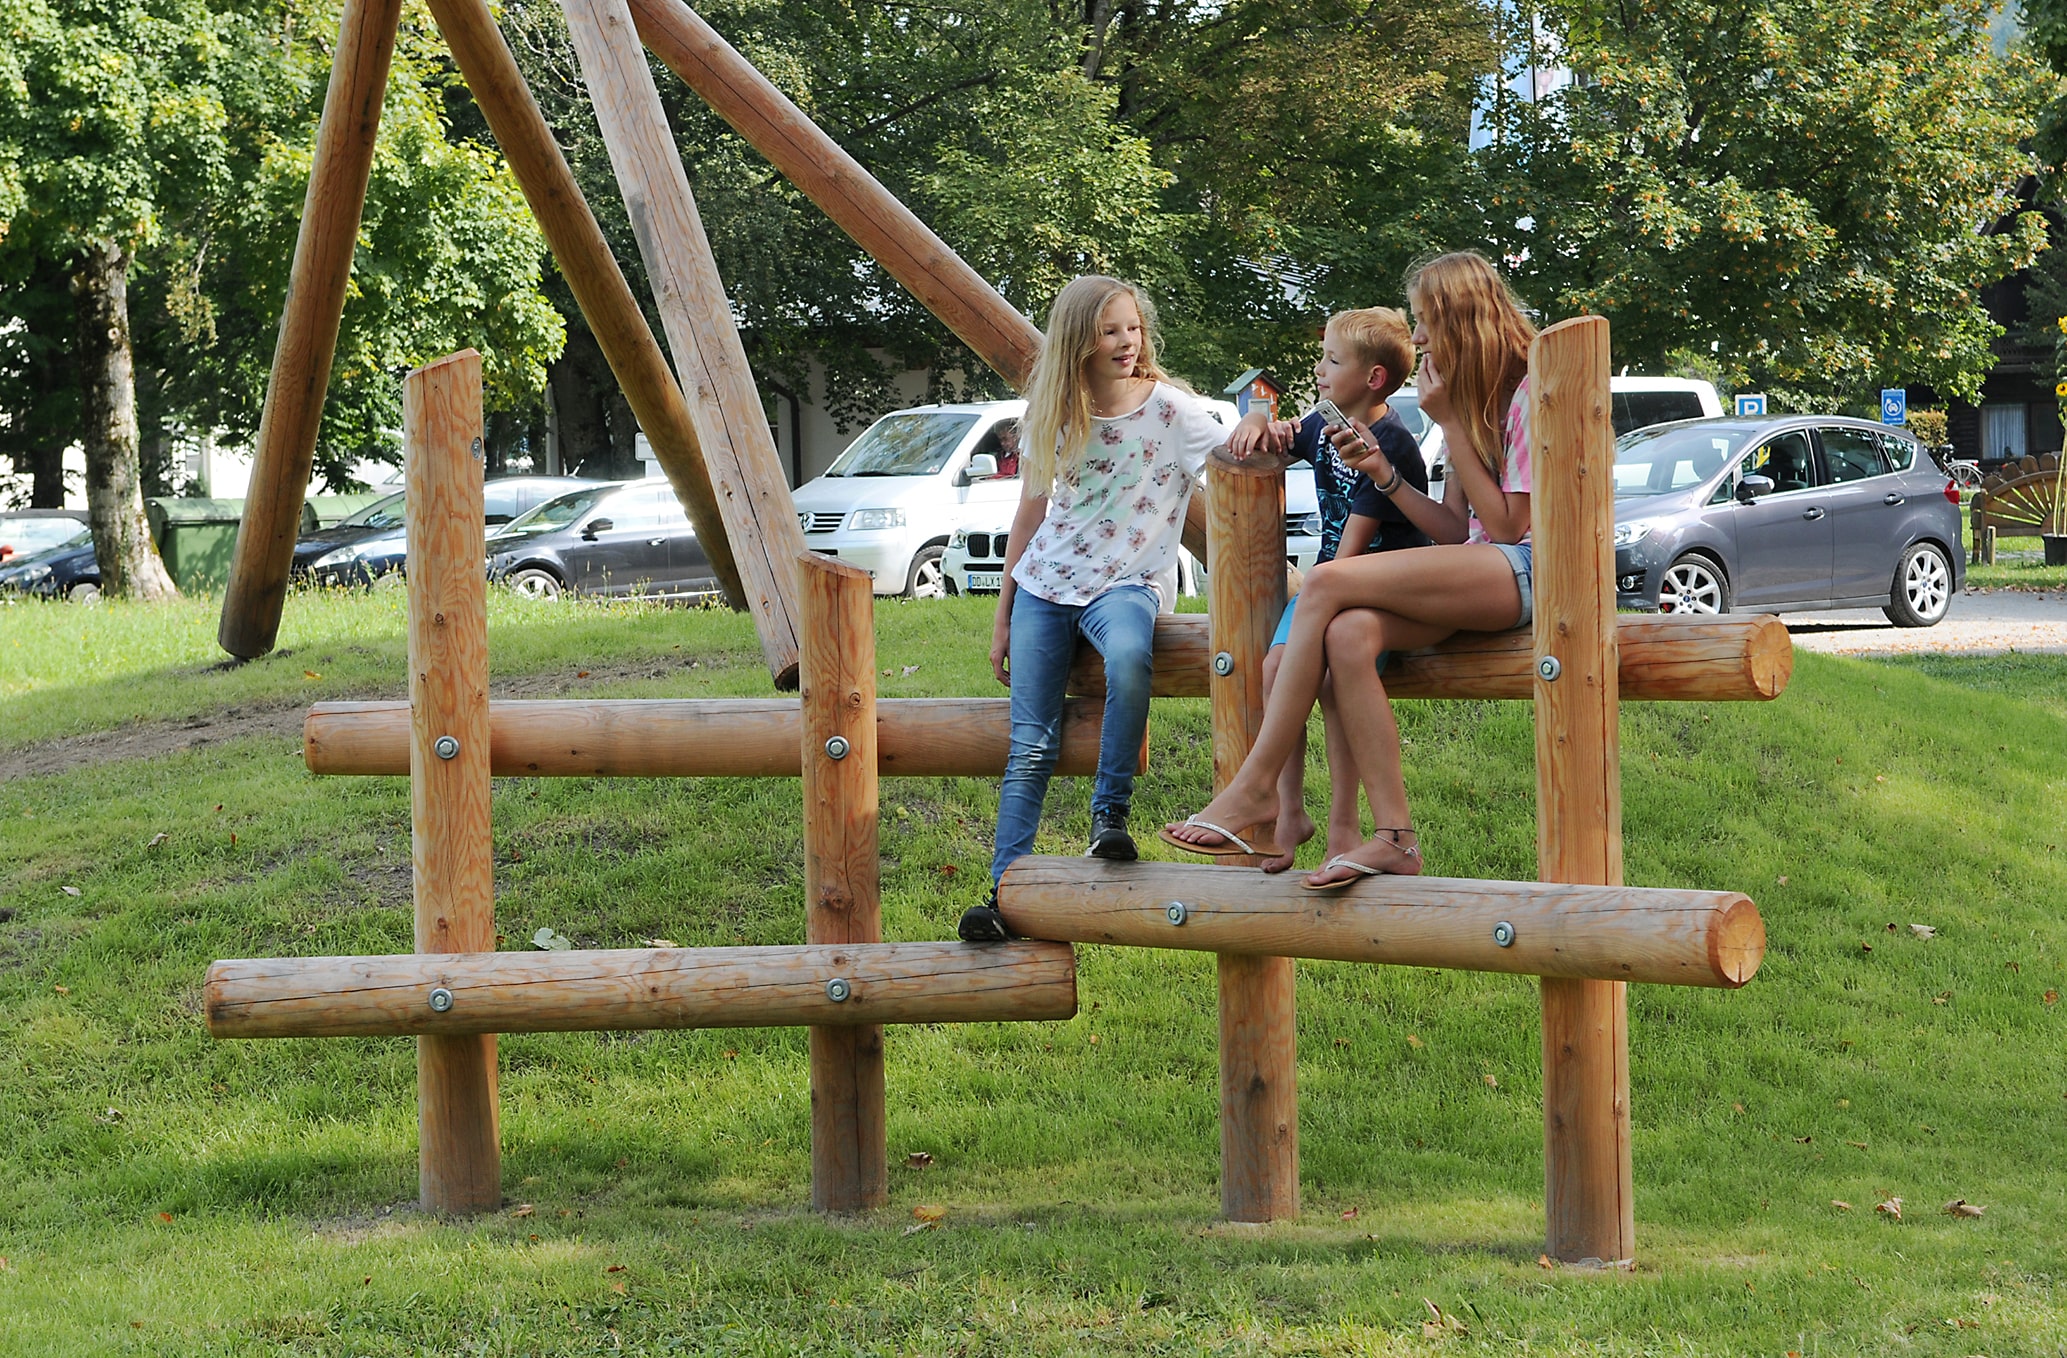 The Sitting Fence is a great seating equipment for play spaces made of timber